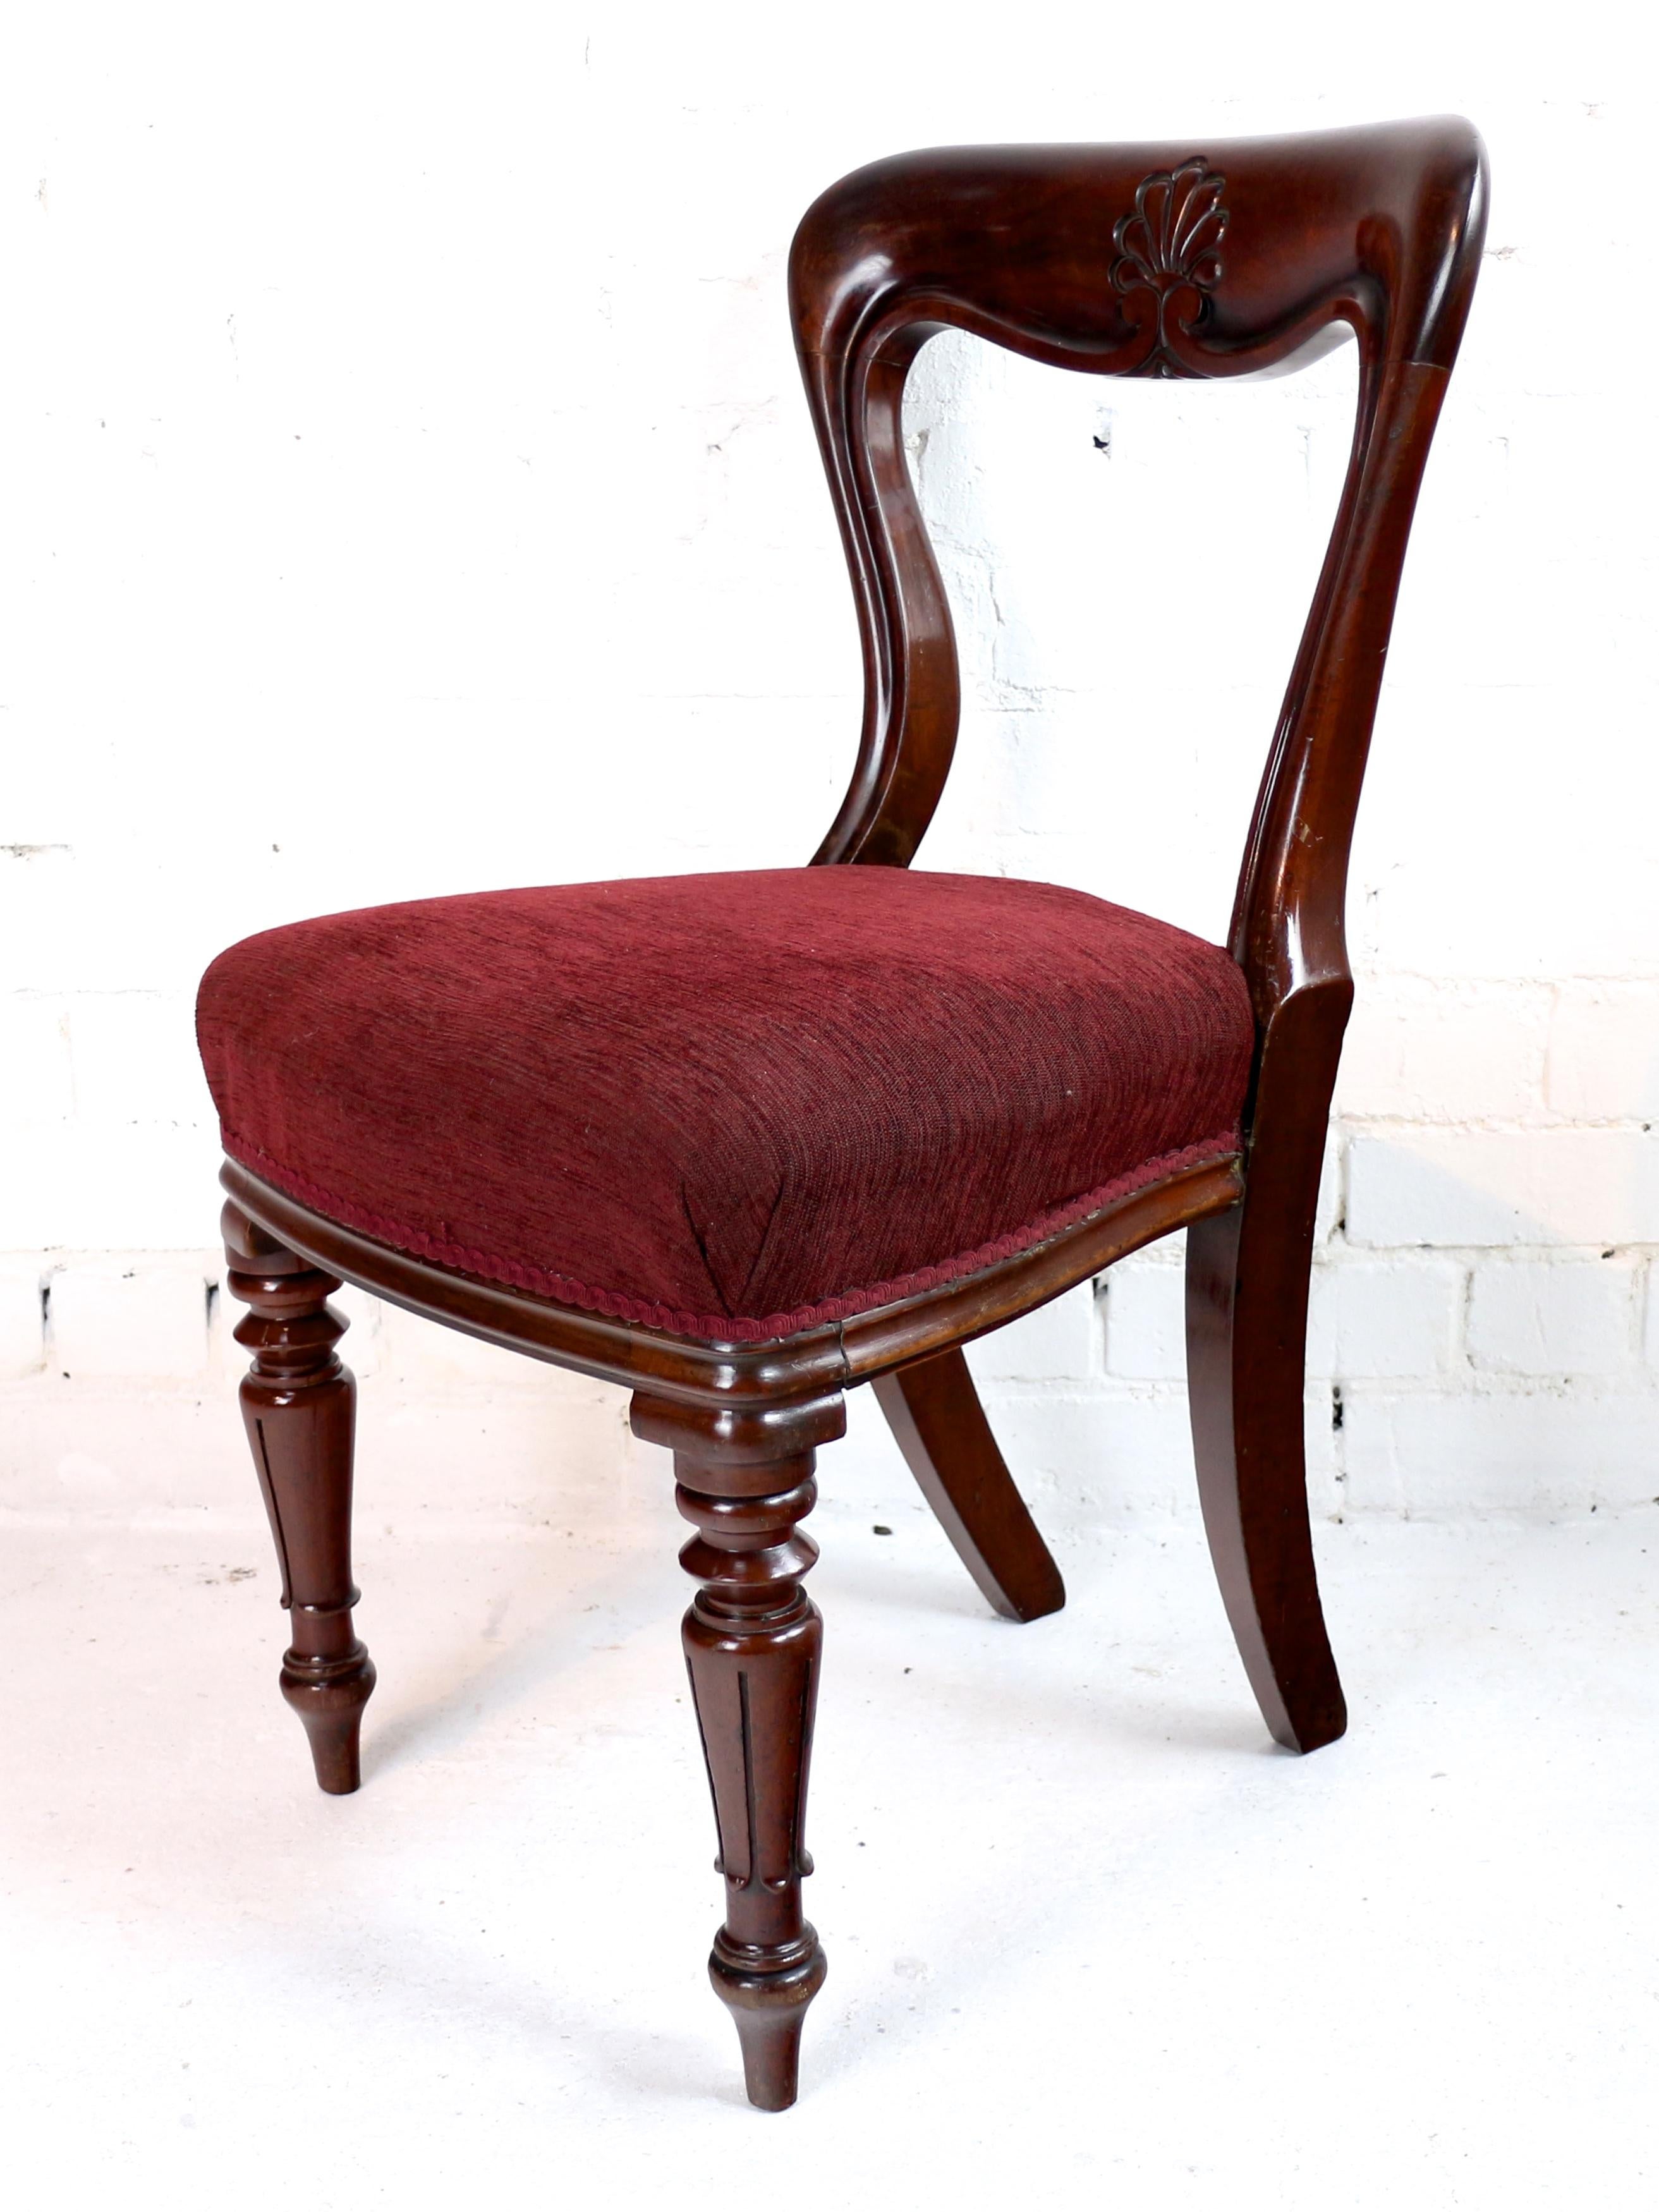 Set of 10 Antique English William IV Mahogany Dining Chairs by J Proctor For Sale 1